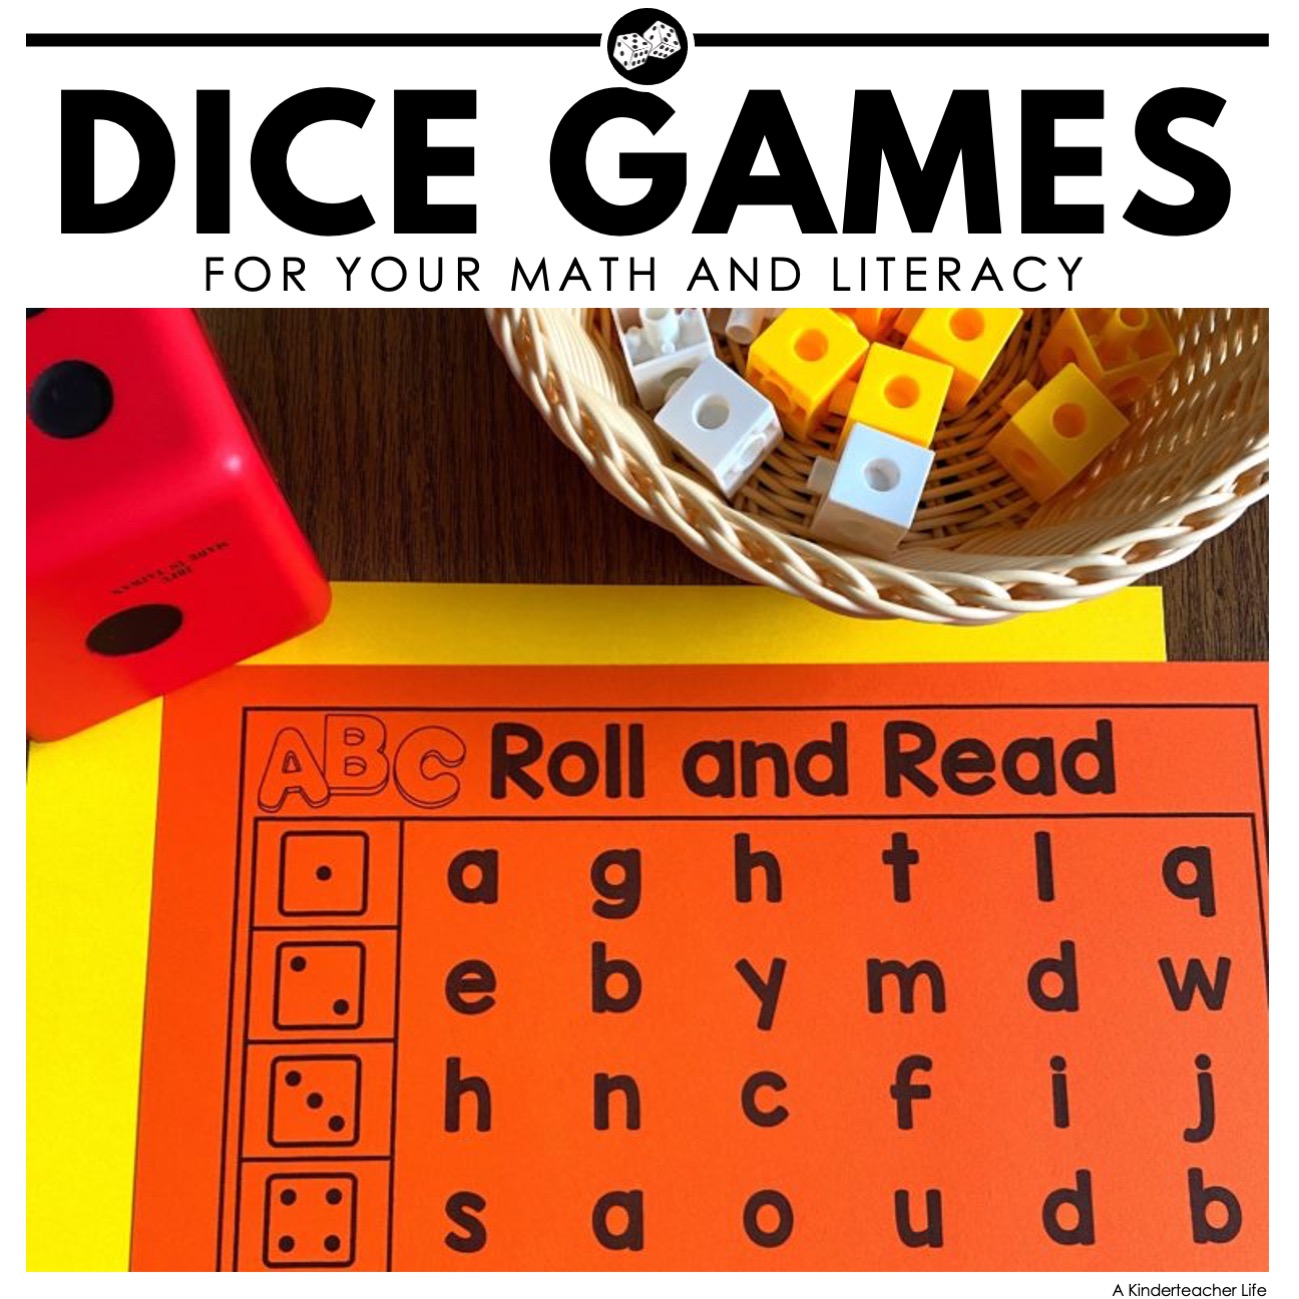 How to Incorporate Dice Games into your Reading and Math Lessons